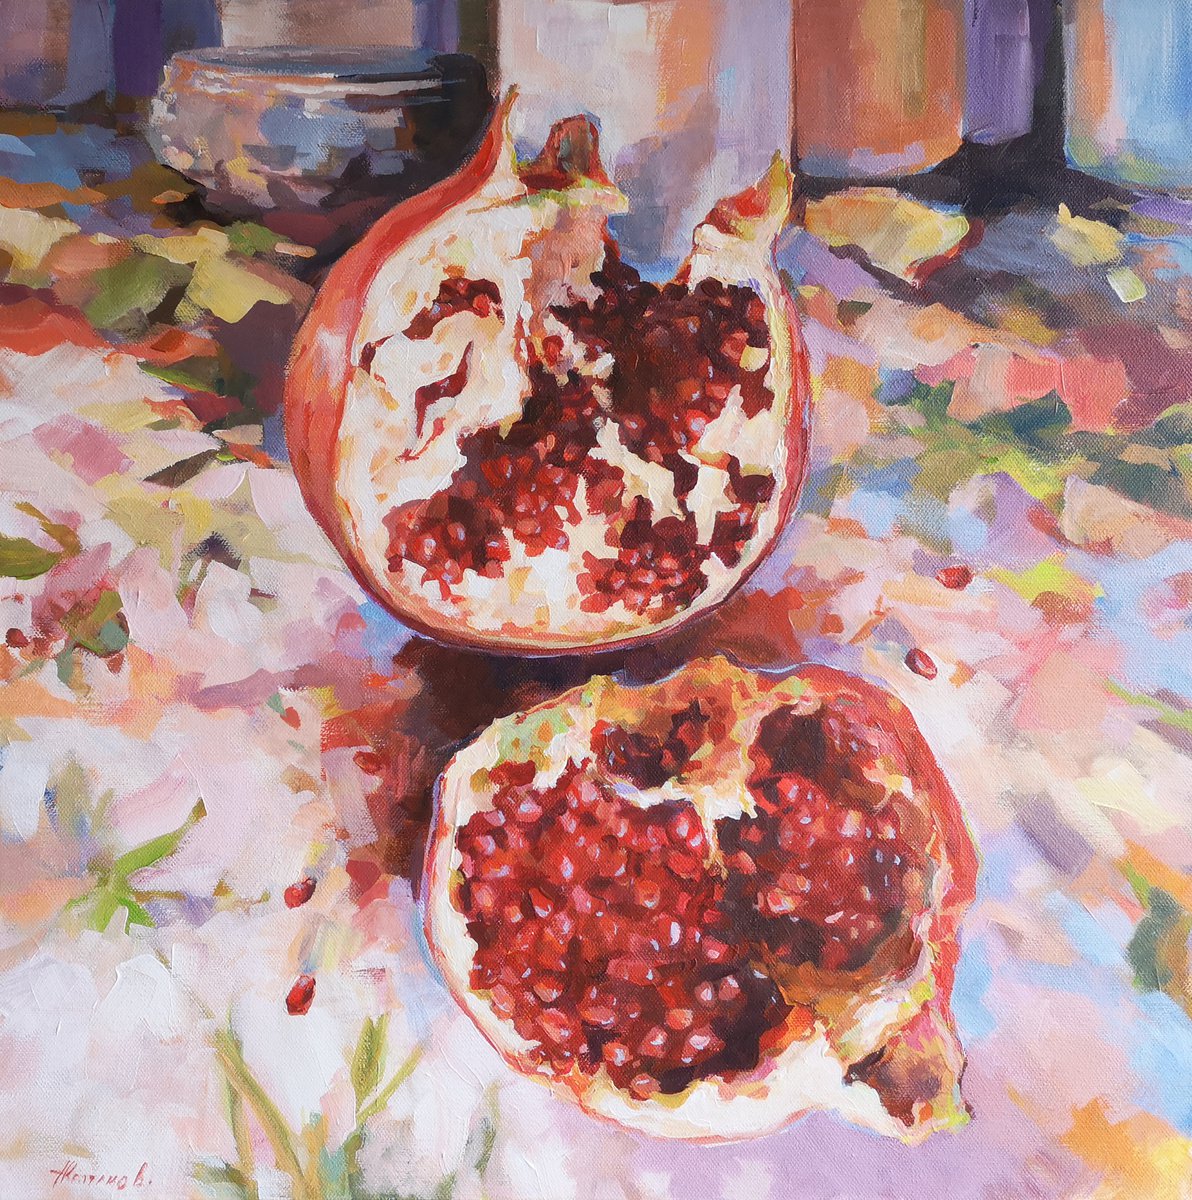 Pomegranate, original, one of a kind, impressionistic style still life painting (20x20x2